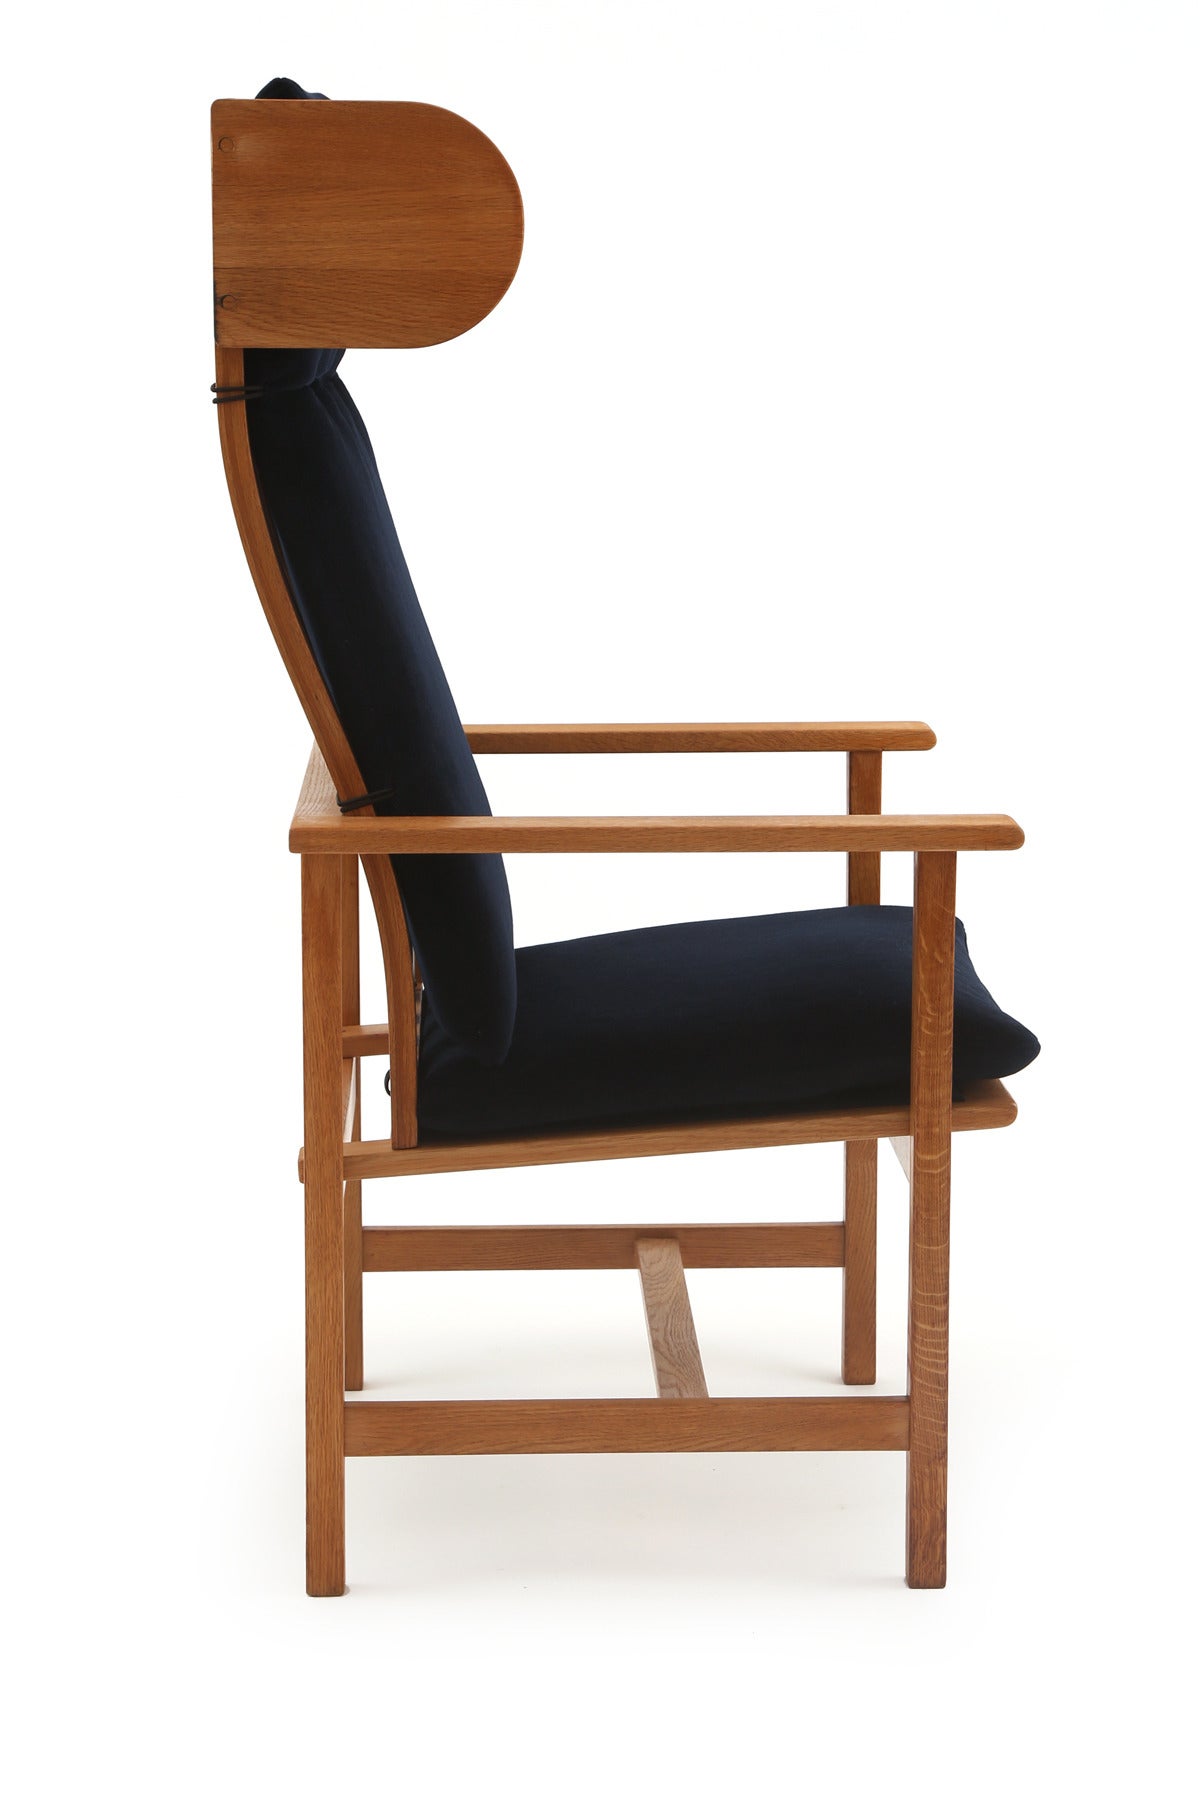 Pair of sculptural oak and mohair lounge chairs by Børge Mogensen, circa early 1960s. These unusual examples have beautifully grained solid oak frames 
and have been newly upholstered in a plush navy blue mohair. Price listed is for the pair.